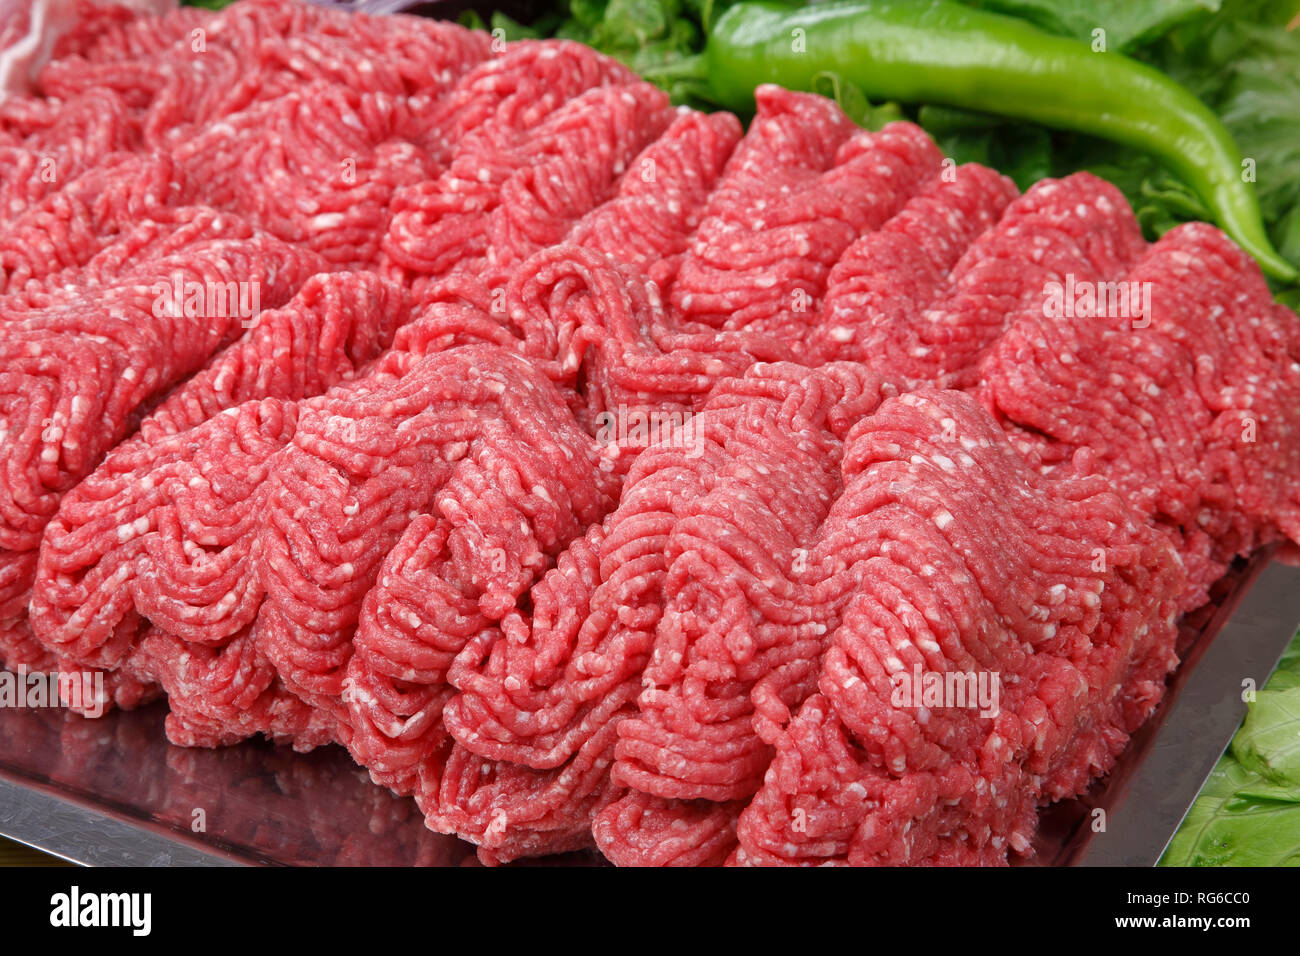 Uncooked ground beef steak and green pepper Stock Photo